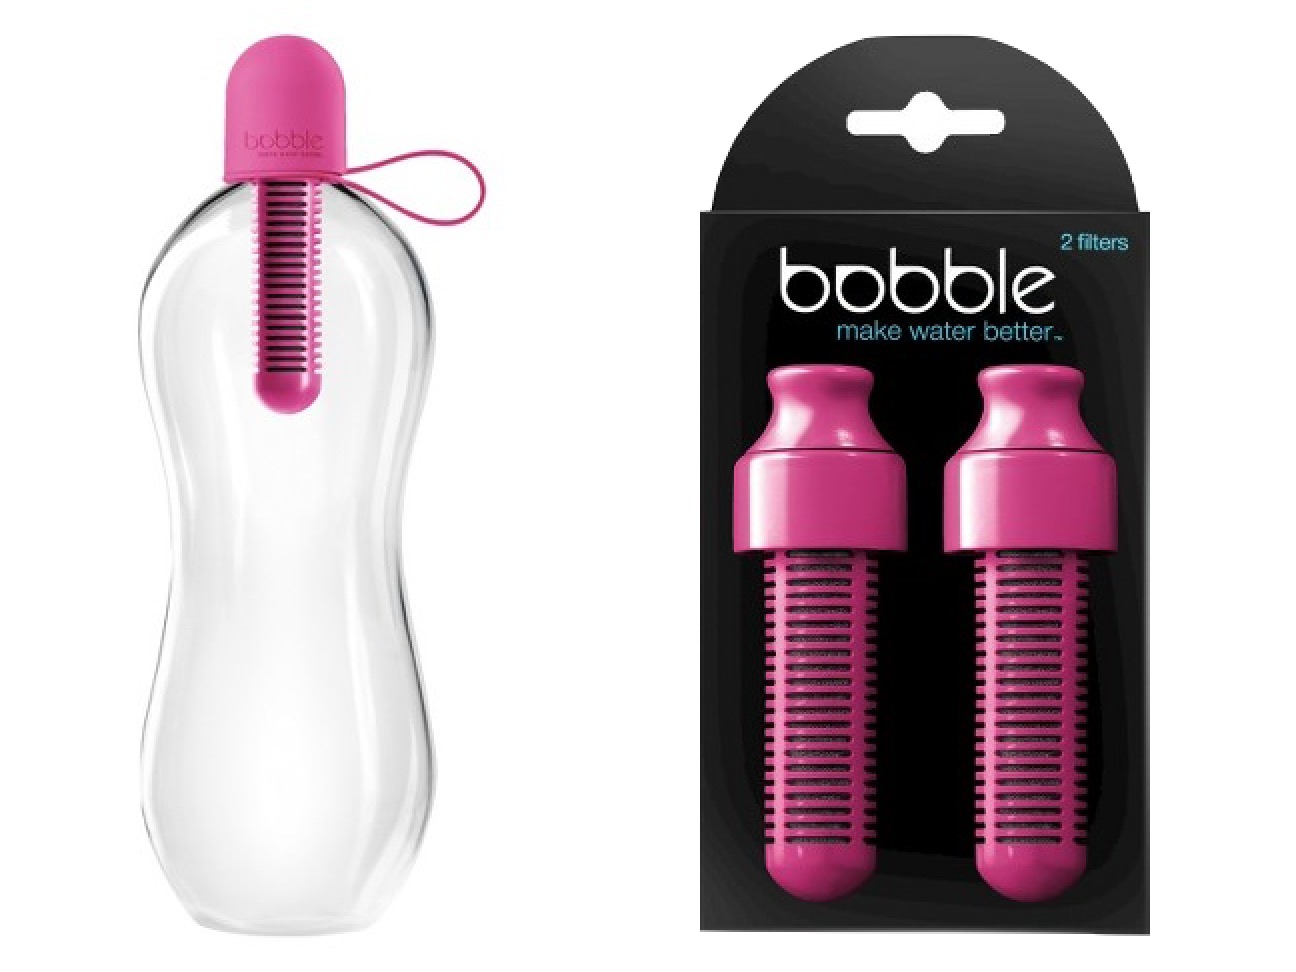 Bobble Bottle and Filters